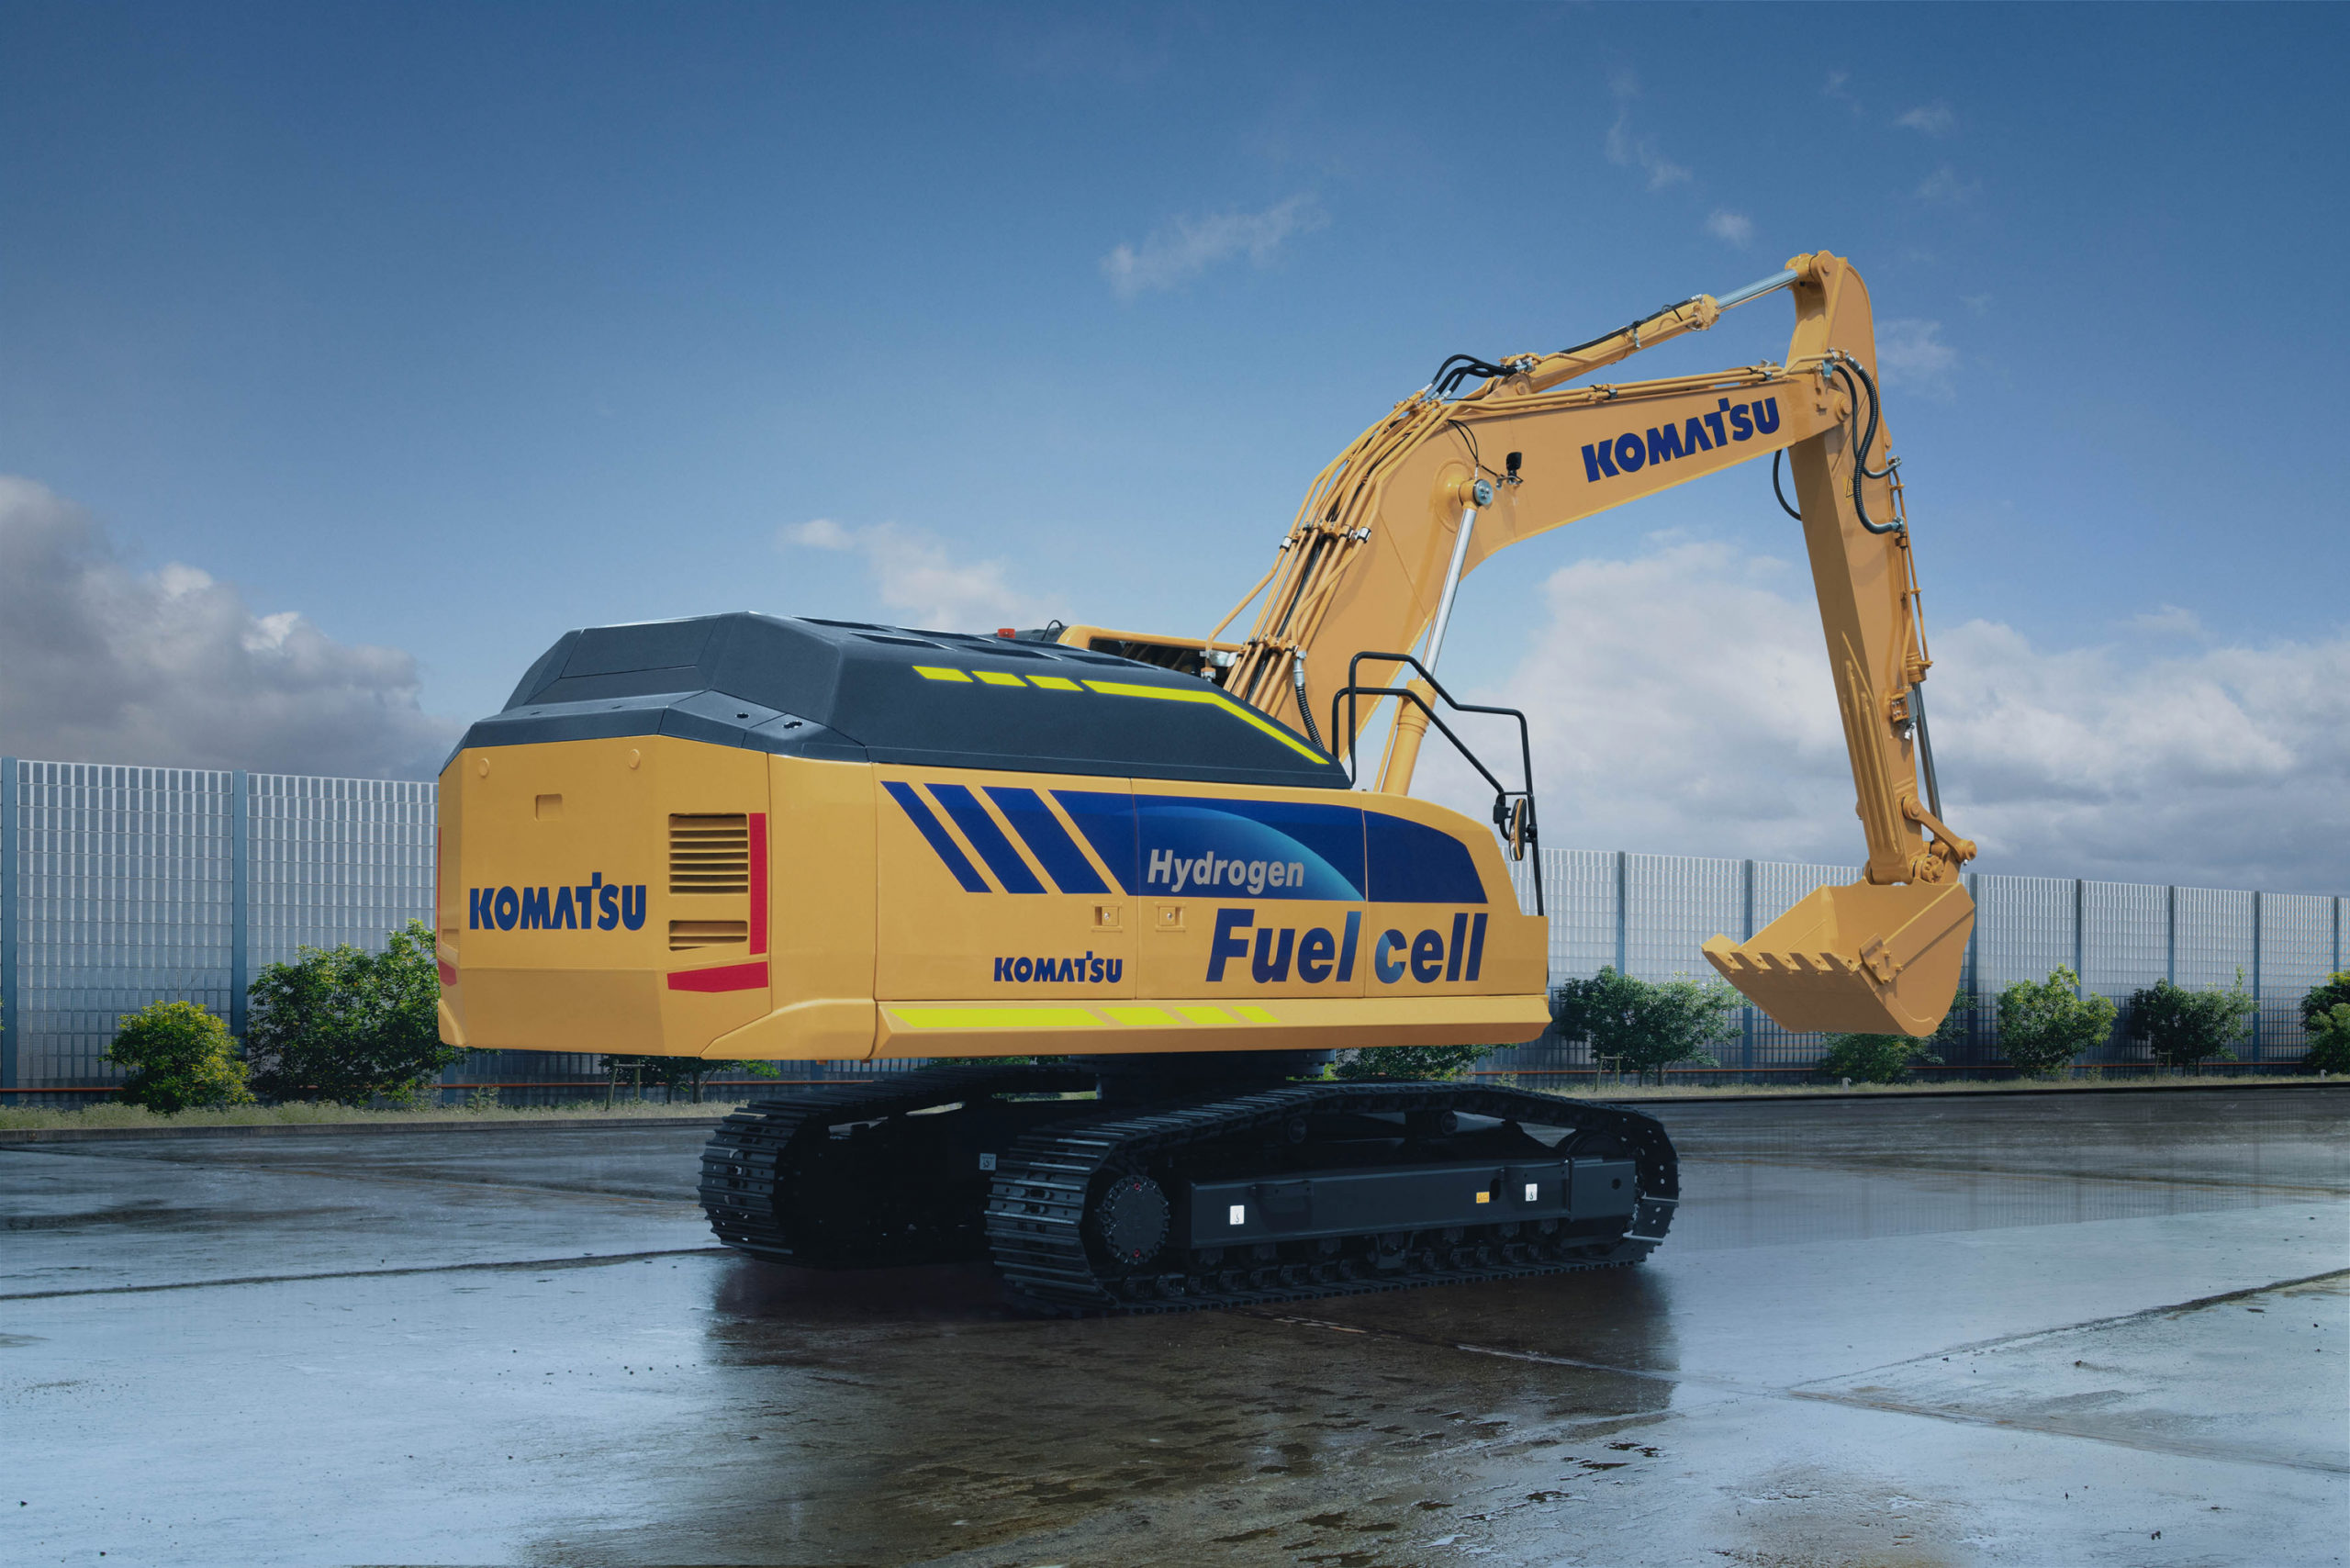 Komatsu announces new concept medium-sized hydraulic excavator equipped with hydrogen fuel cell system